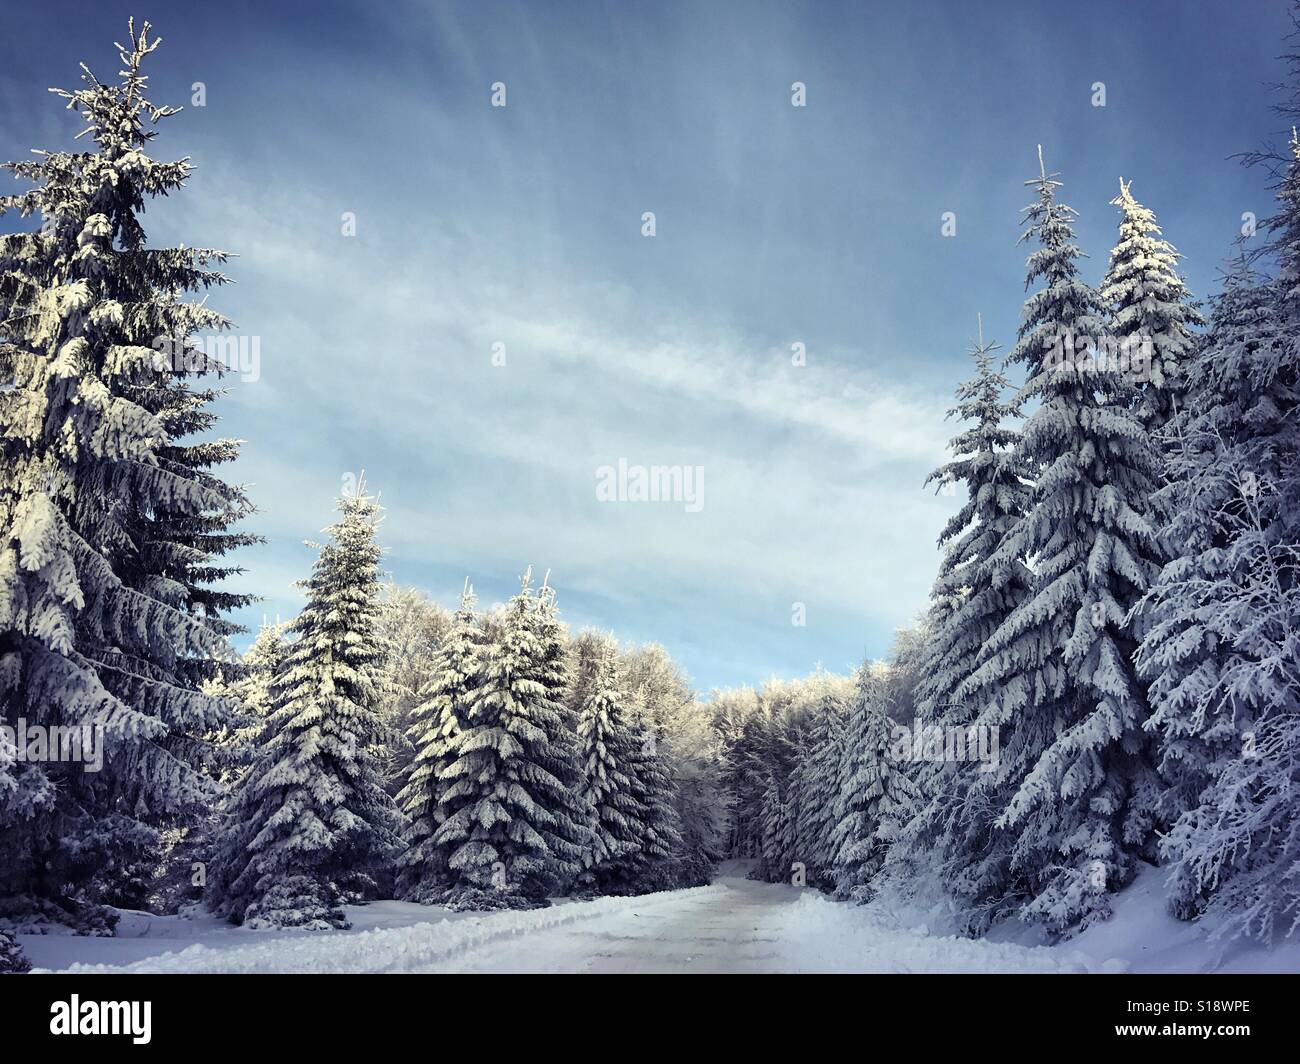 Snowy mountain road in winter. Winter landscape. Snow covered pines on the side of an snowy mountain road. Romania, Europe Stock Photo